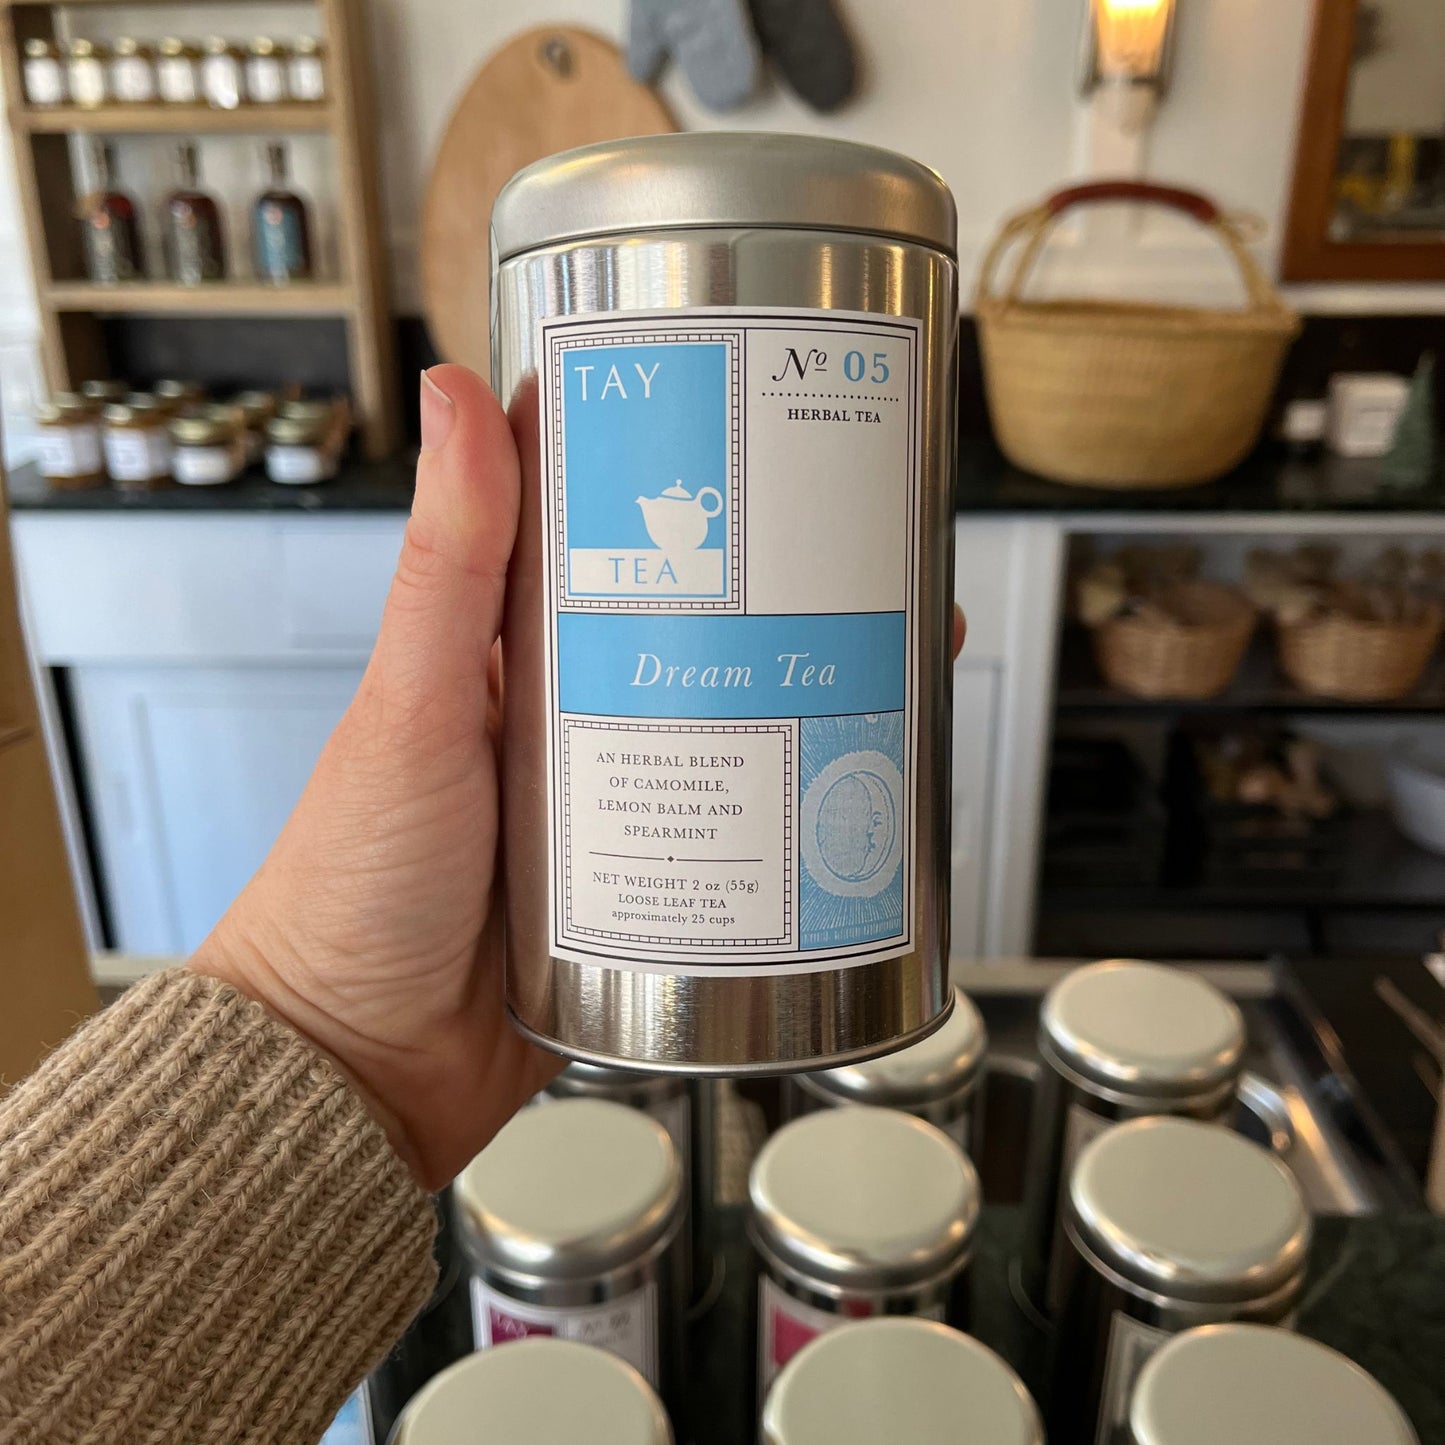 Dream Tea from Tay Tea made with chamomile, lemon balm and spearmint. 4 Oz. of loose tea is packaged in a resealable tin. 